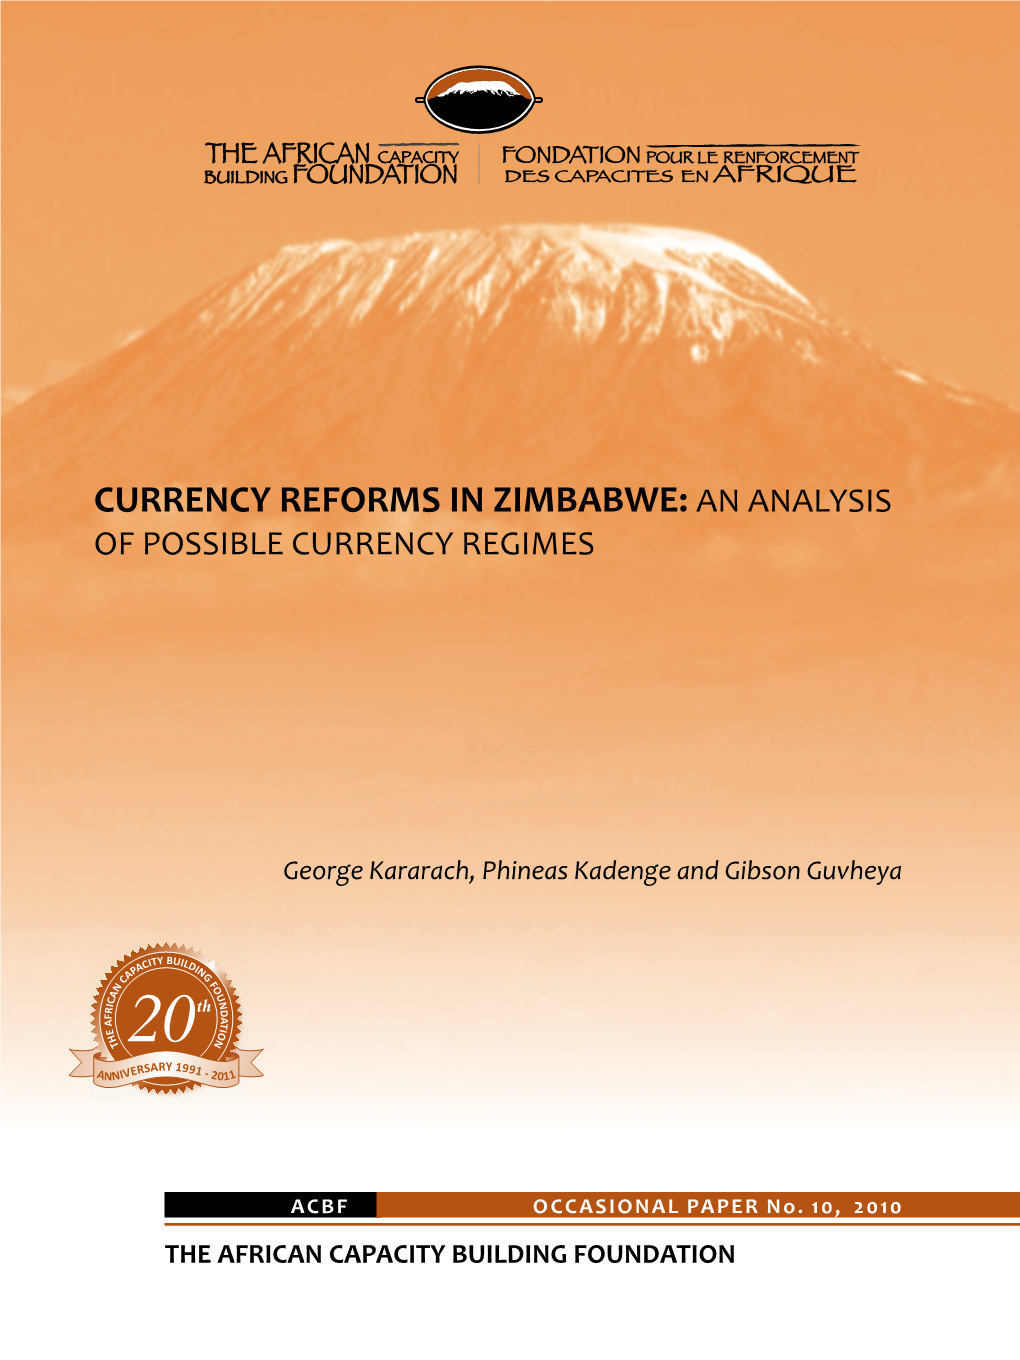 Currency Reforms in Zimbabwe: an Analysis of Possible Currency Regimes